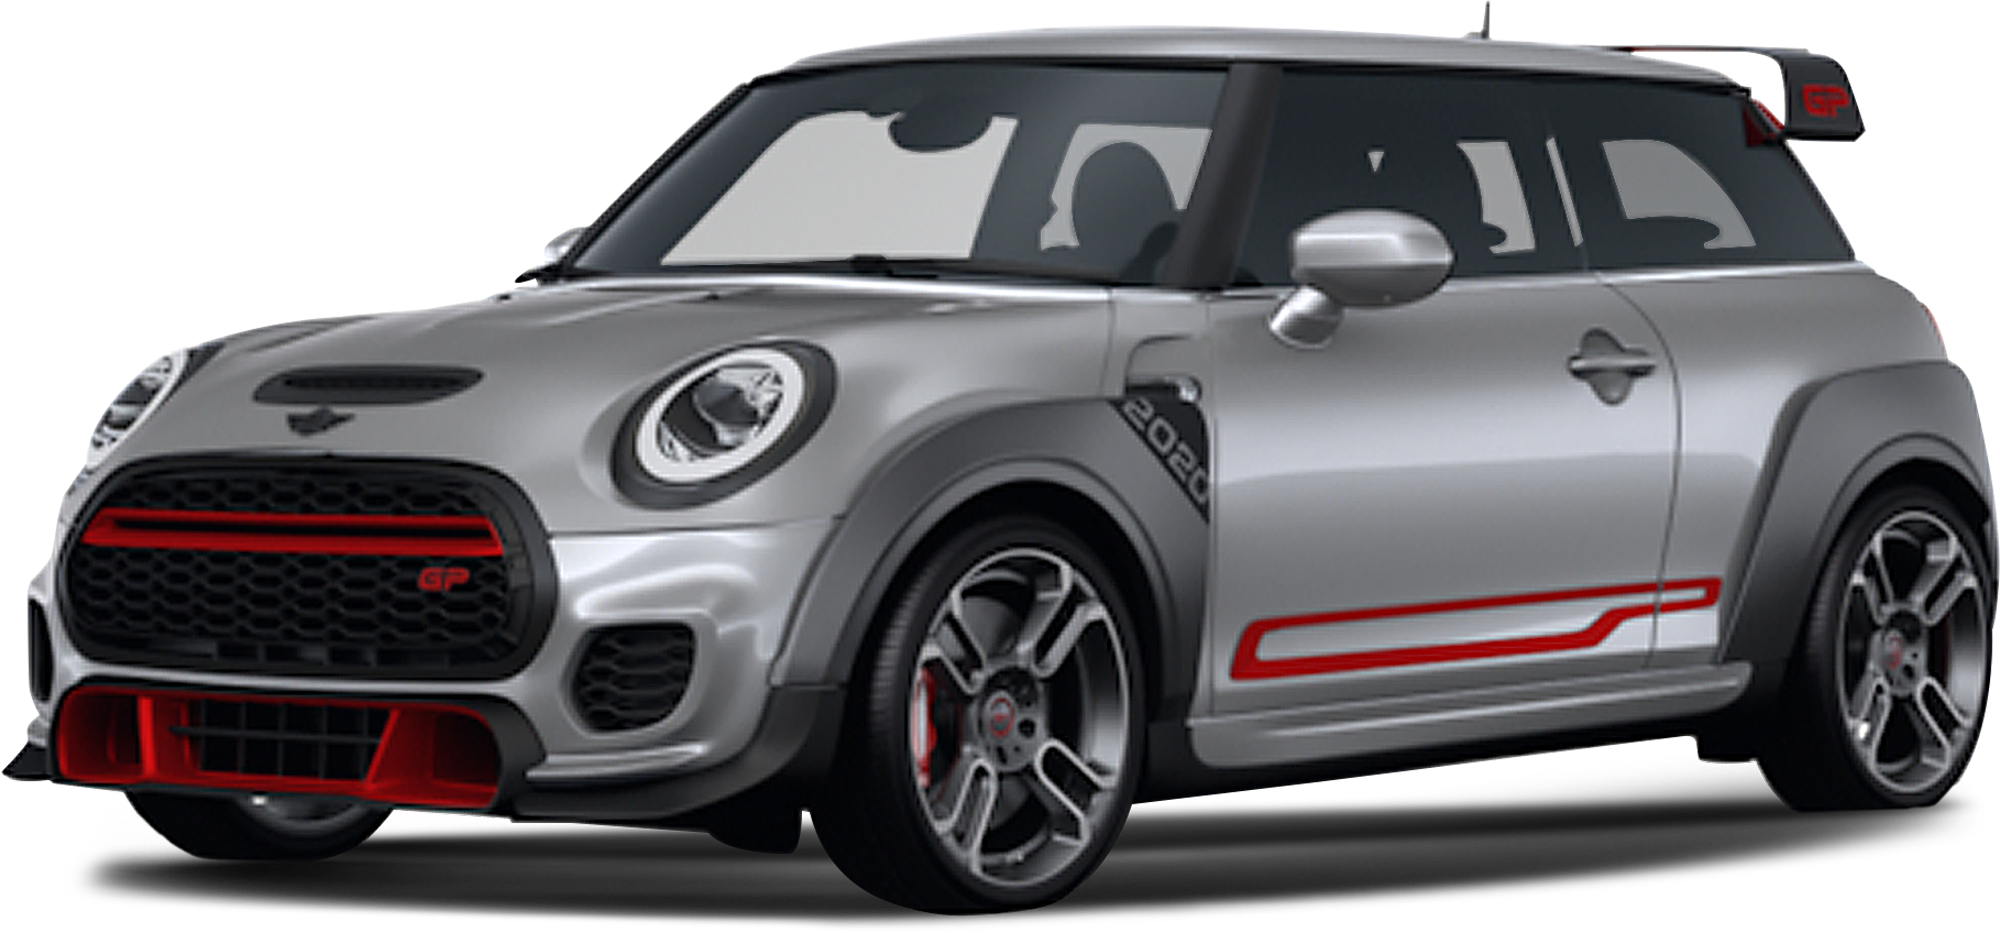 2021-mini-john-cooper-works-gp-incentives-specials-offers-in-medford-or